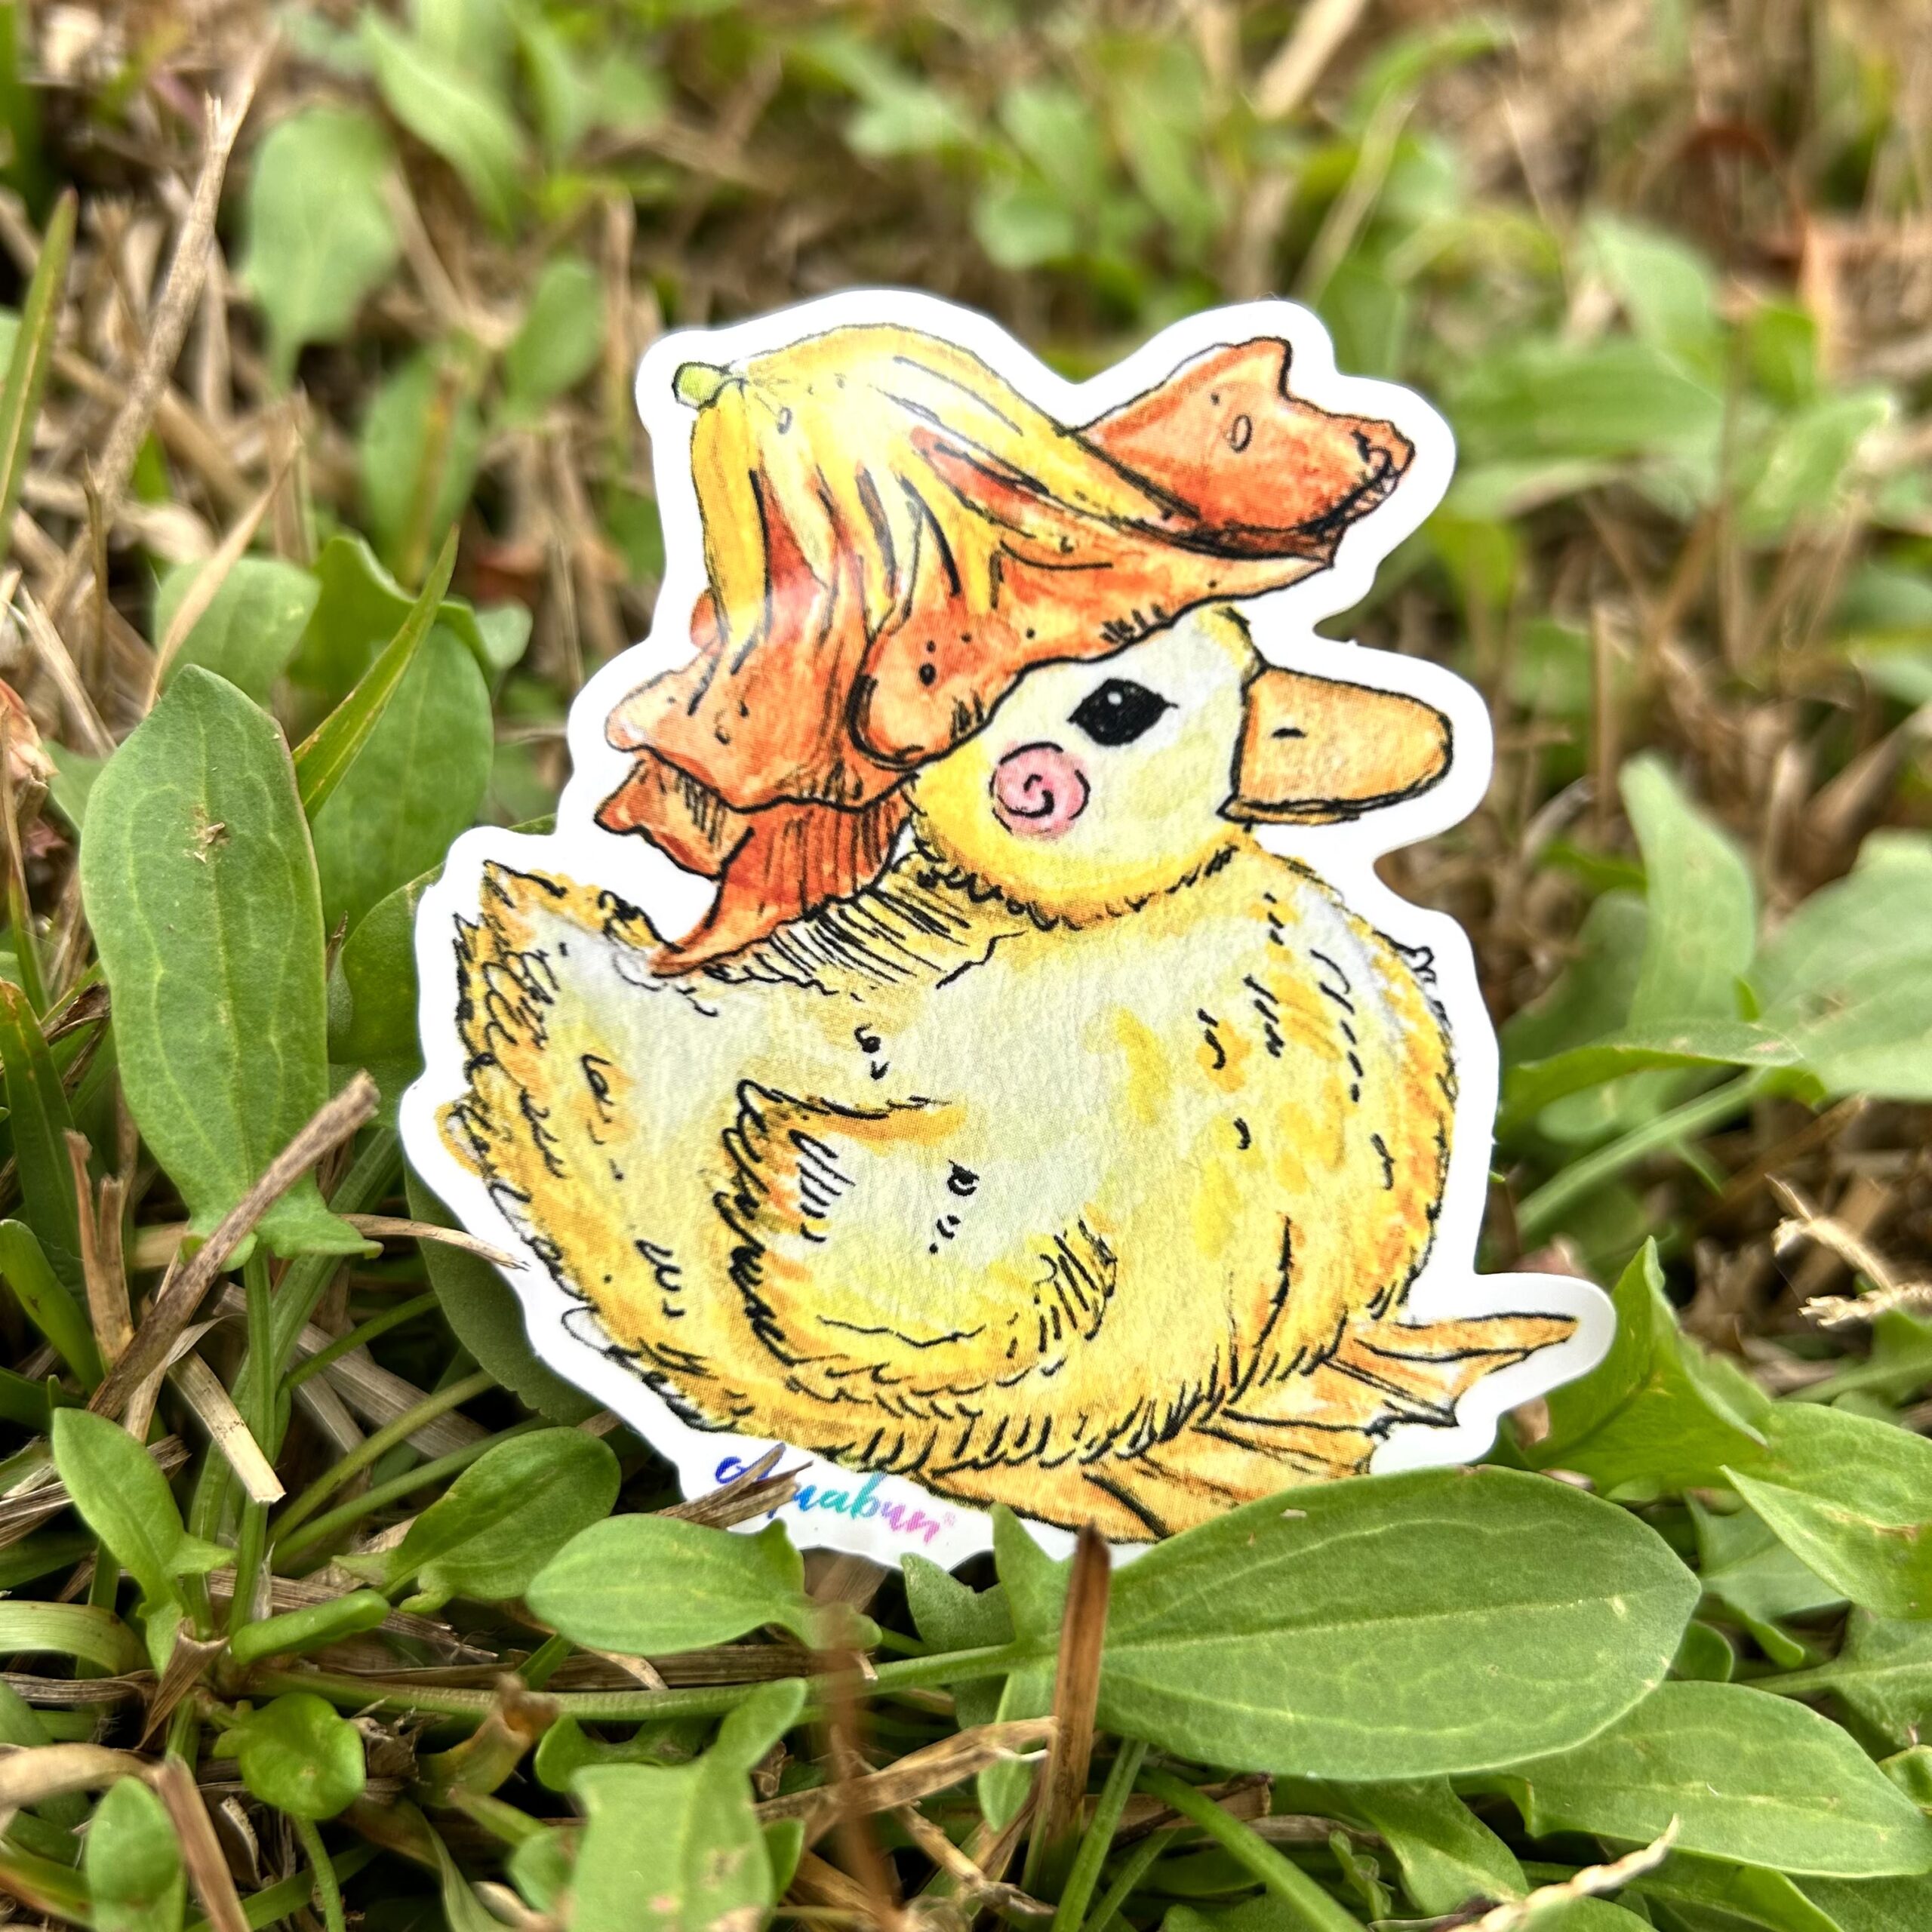 Stickers I had made of my normal Duckling watercolor painting